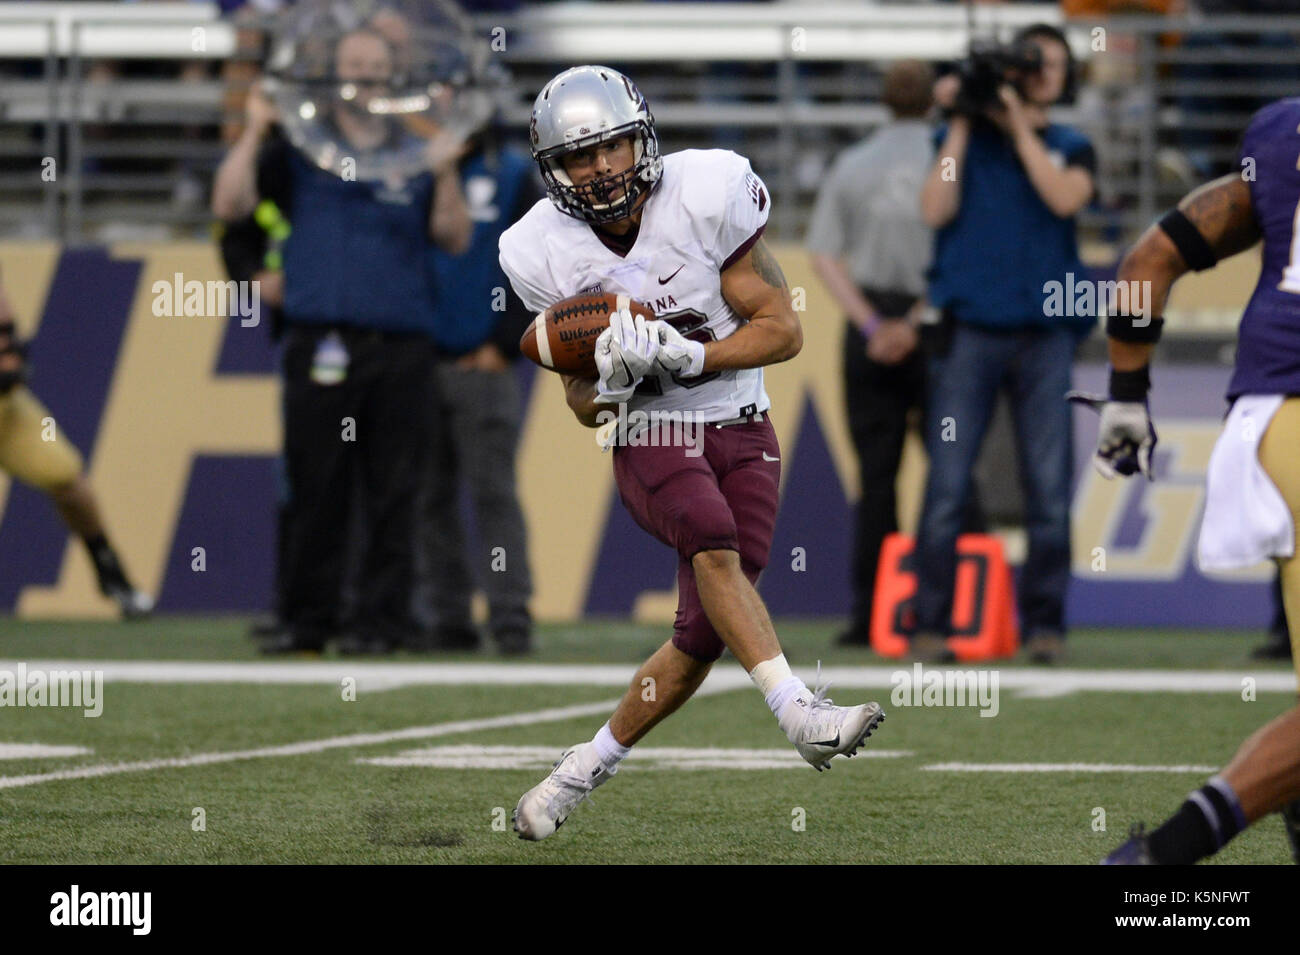 Seattle, WA, USA. 9th Sep, 2017. Montana receiver Samuel Akem (18) catches a pass in a game between the Montana Grizzlies and the Washington Huskies. The game was played at Husky Stadium on the University of Washington campus in Seattle, WA. Jeff Halstead/CSM/Alamy Live News Stock Photo